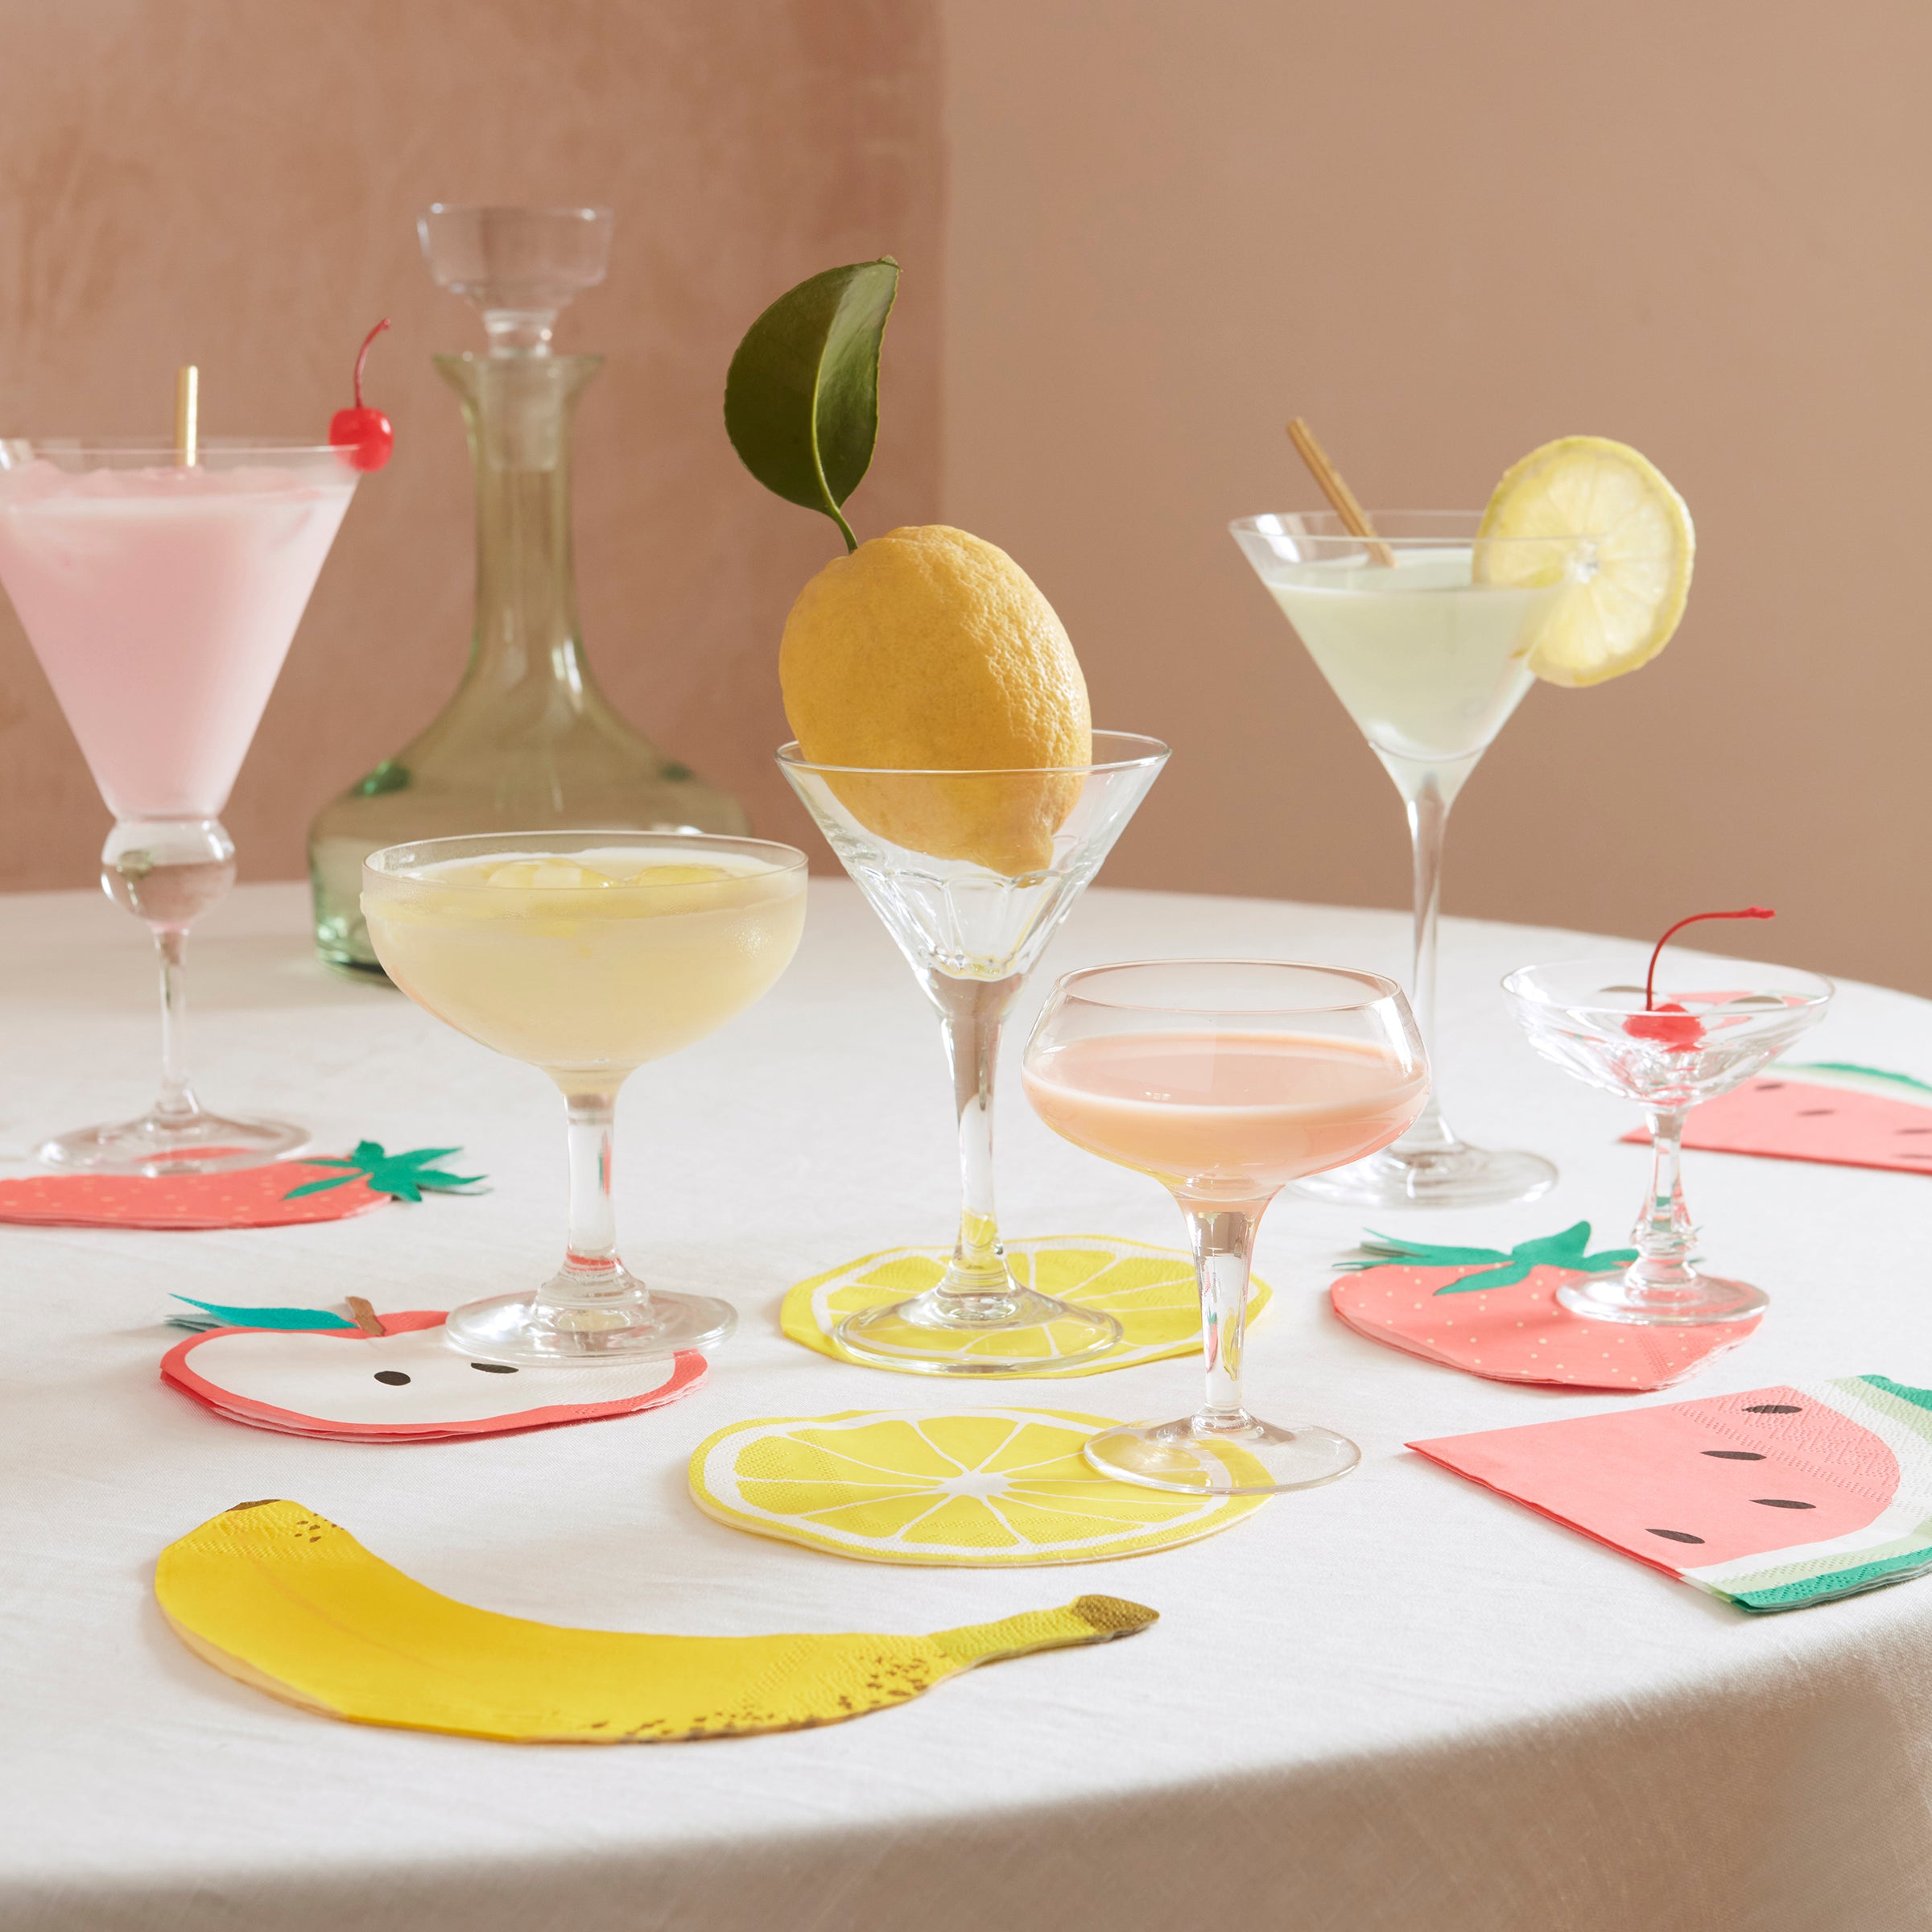 Our paper napkins, designed to look like red apples, are ideal for garden parties.